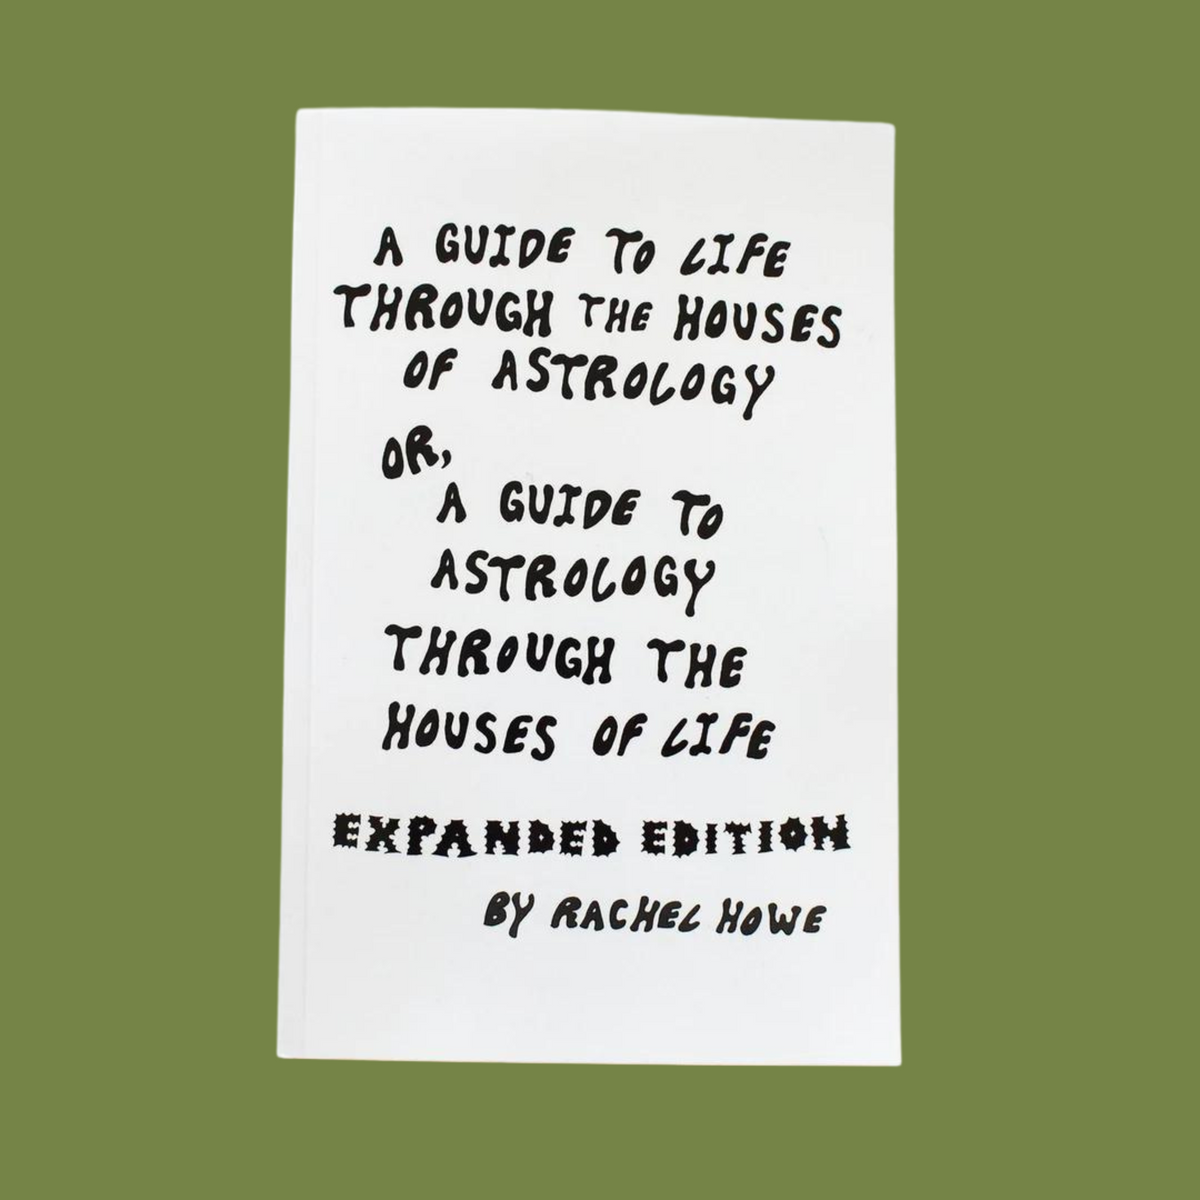 A Guide to Life Through The Houses of Astrology